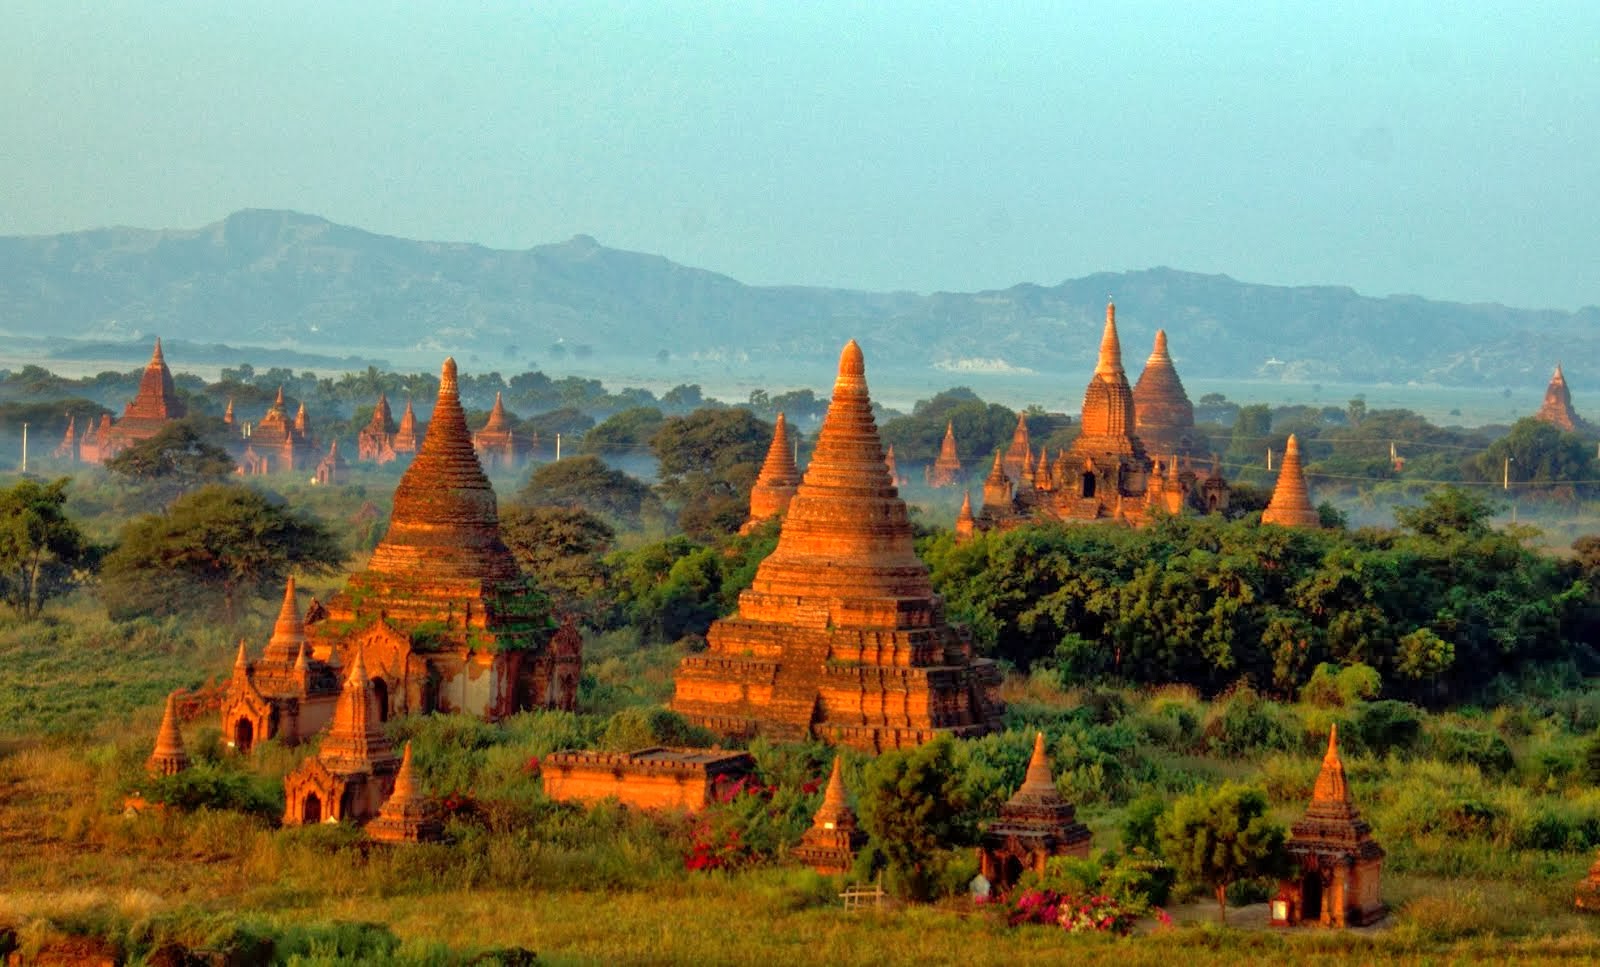 Historic Relics in my Corner of the World: Bagan Pagodas, 10th-14th Century